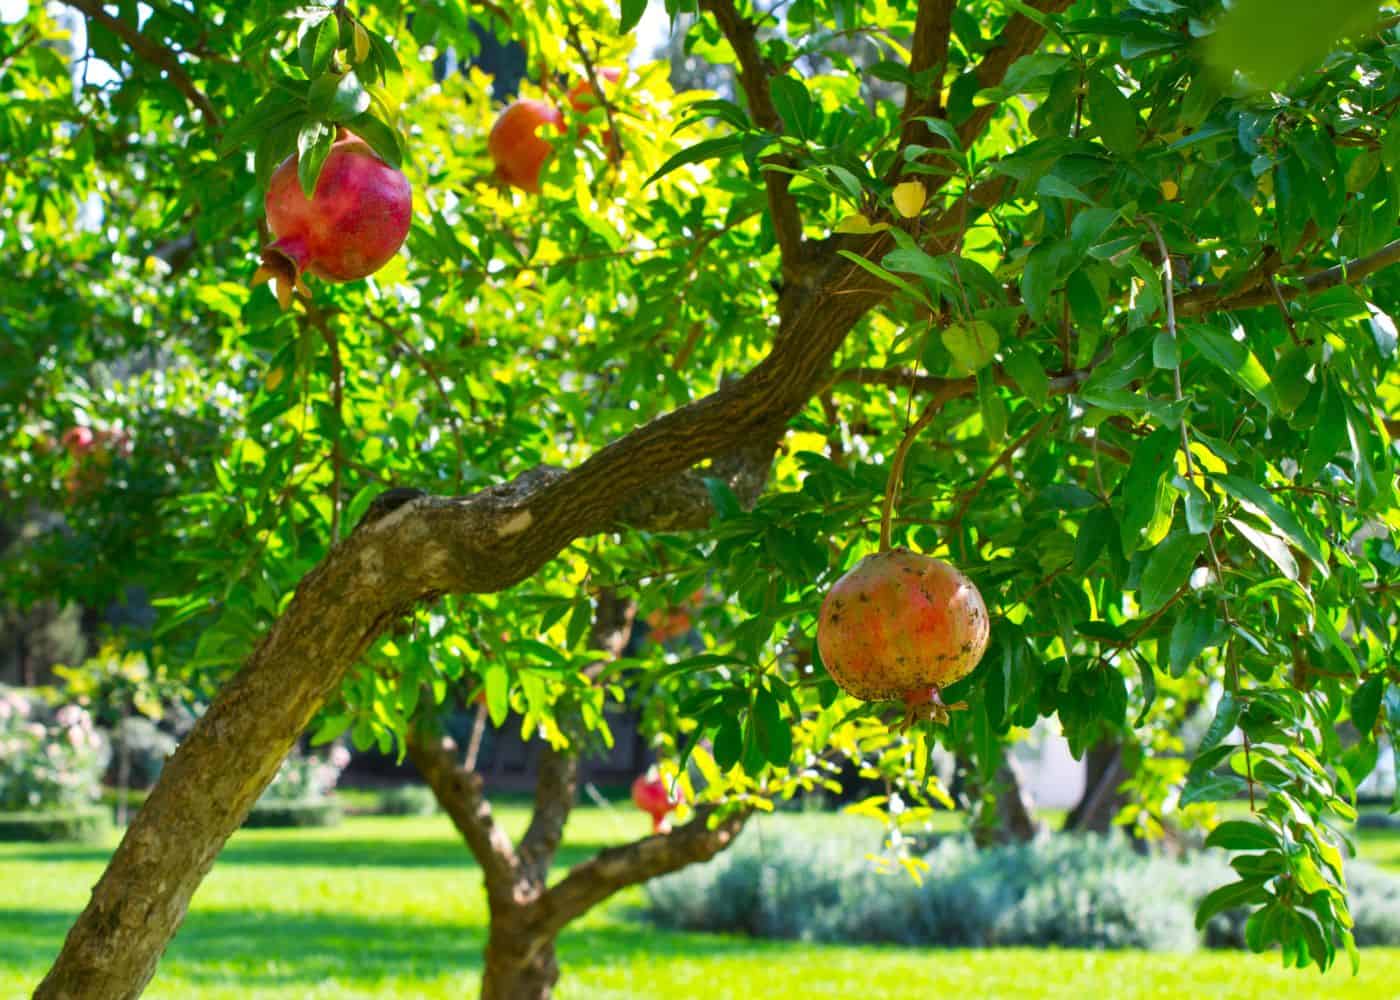 How to care for pomegranate trees